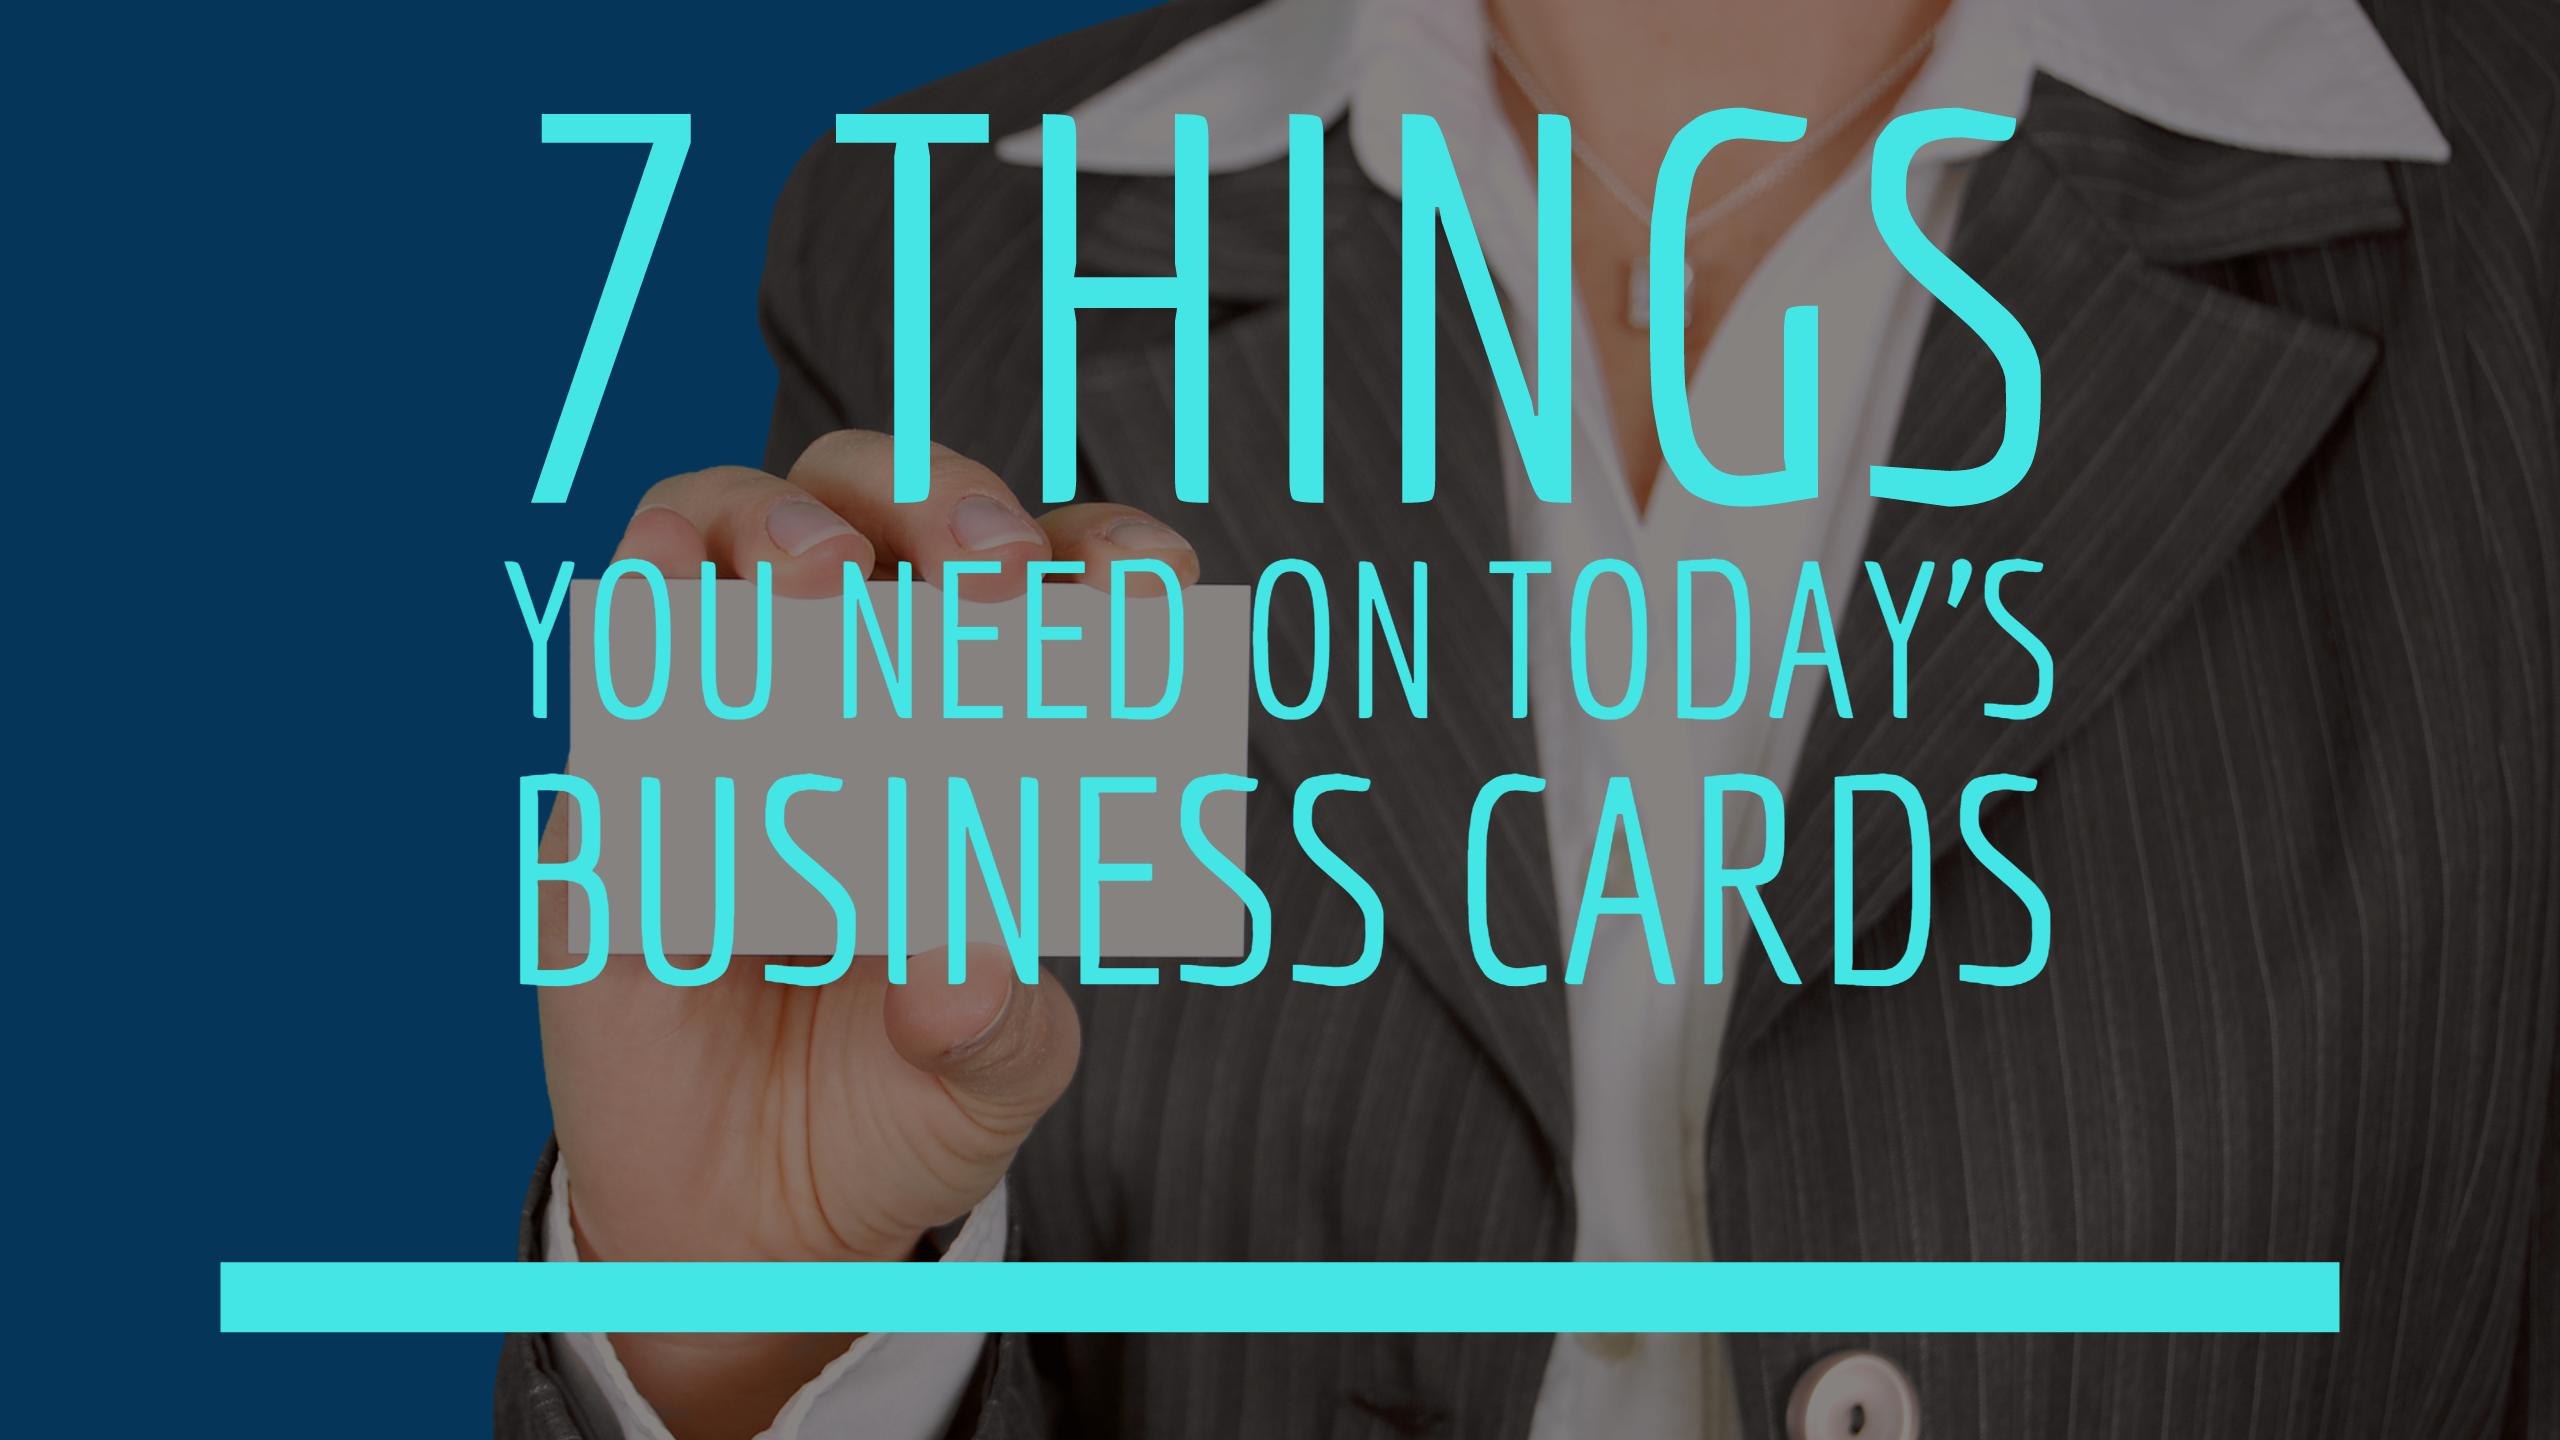 Tips for an amazing business card